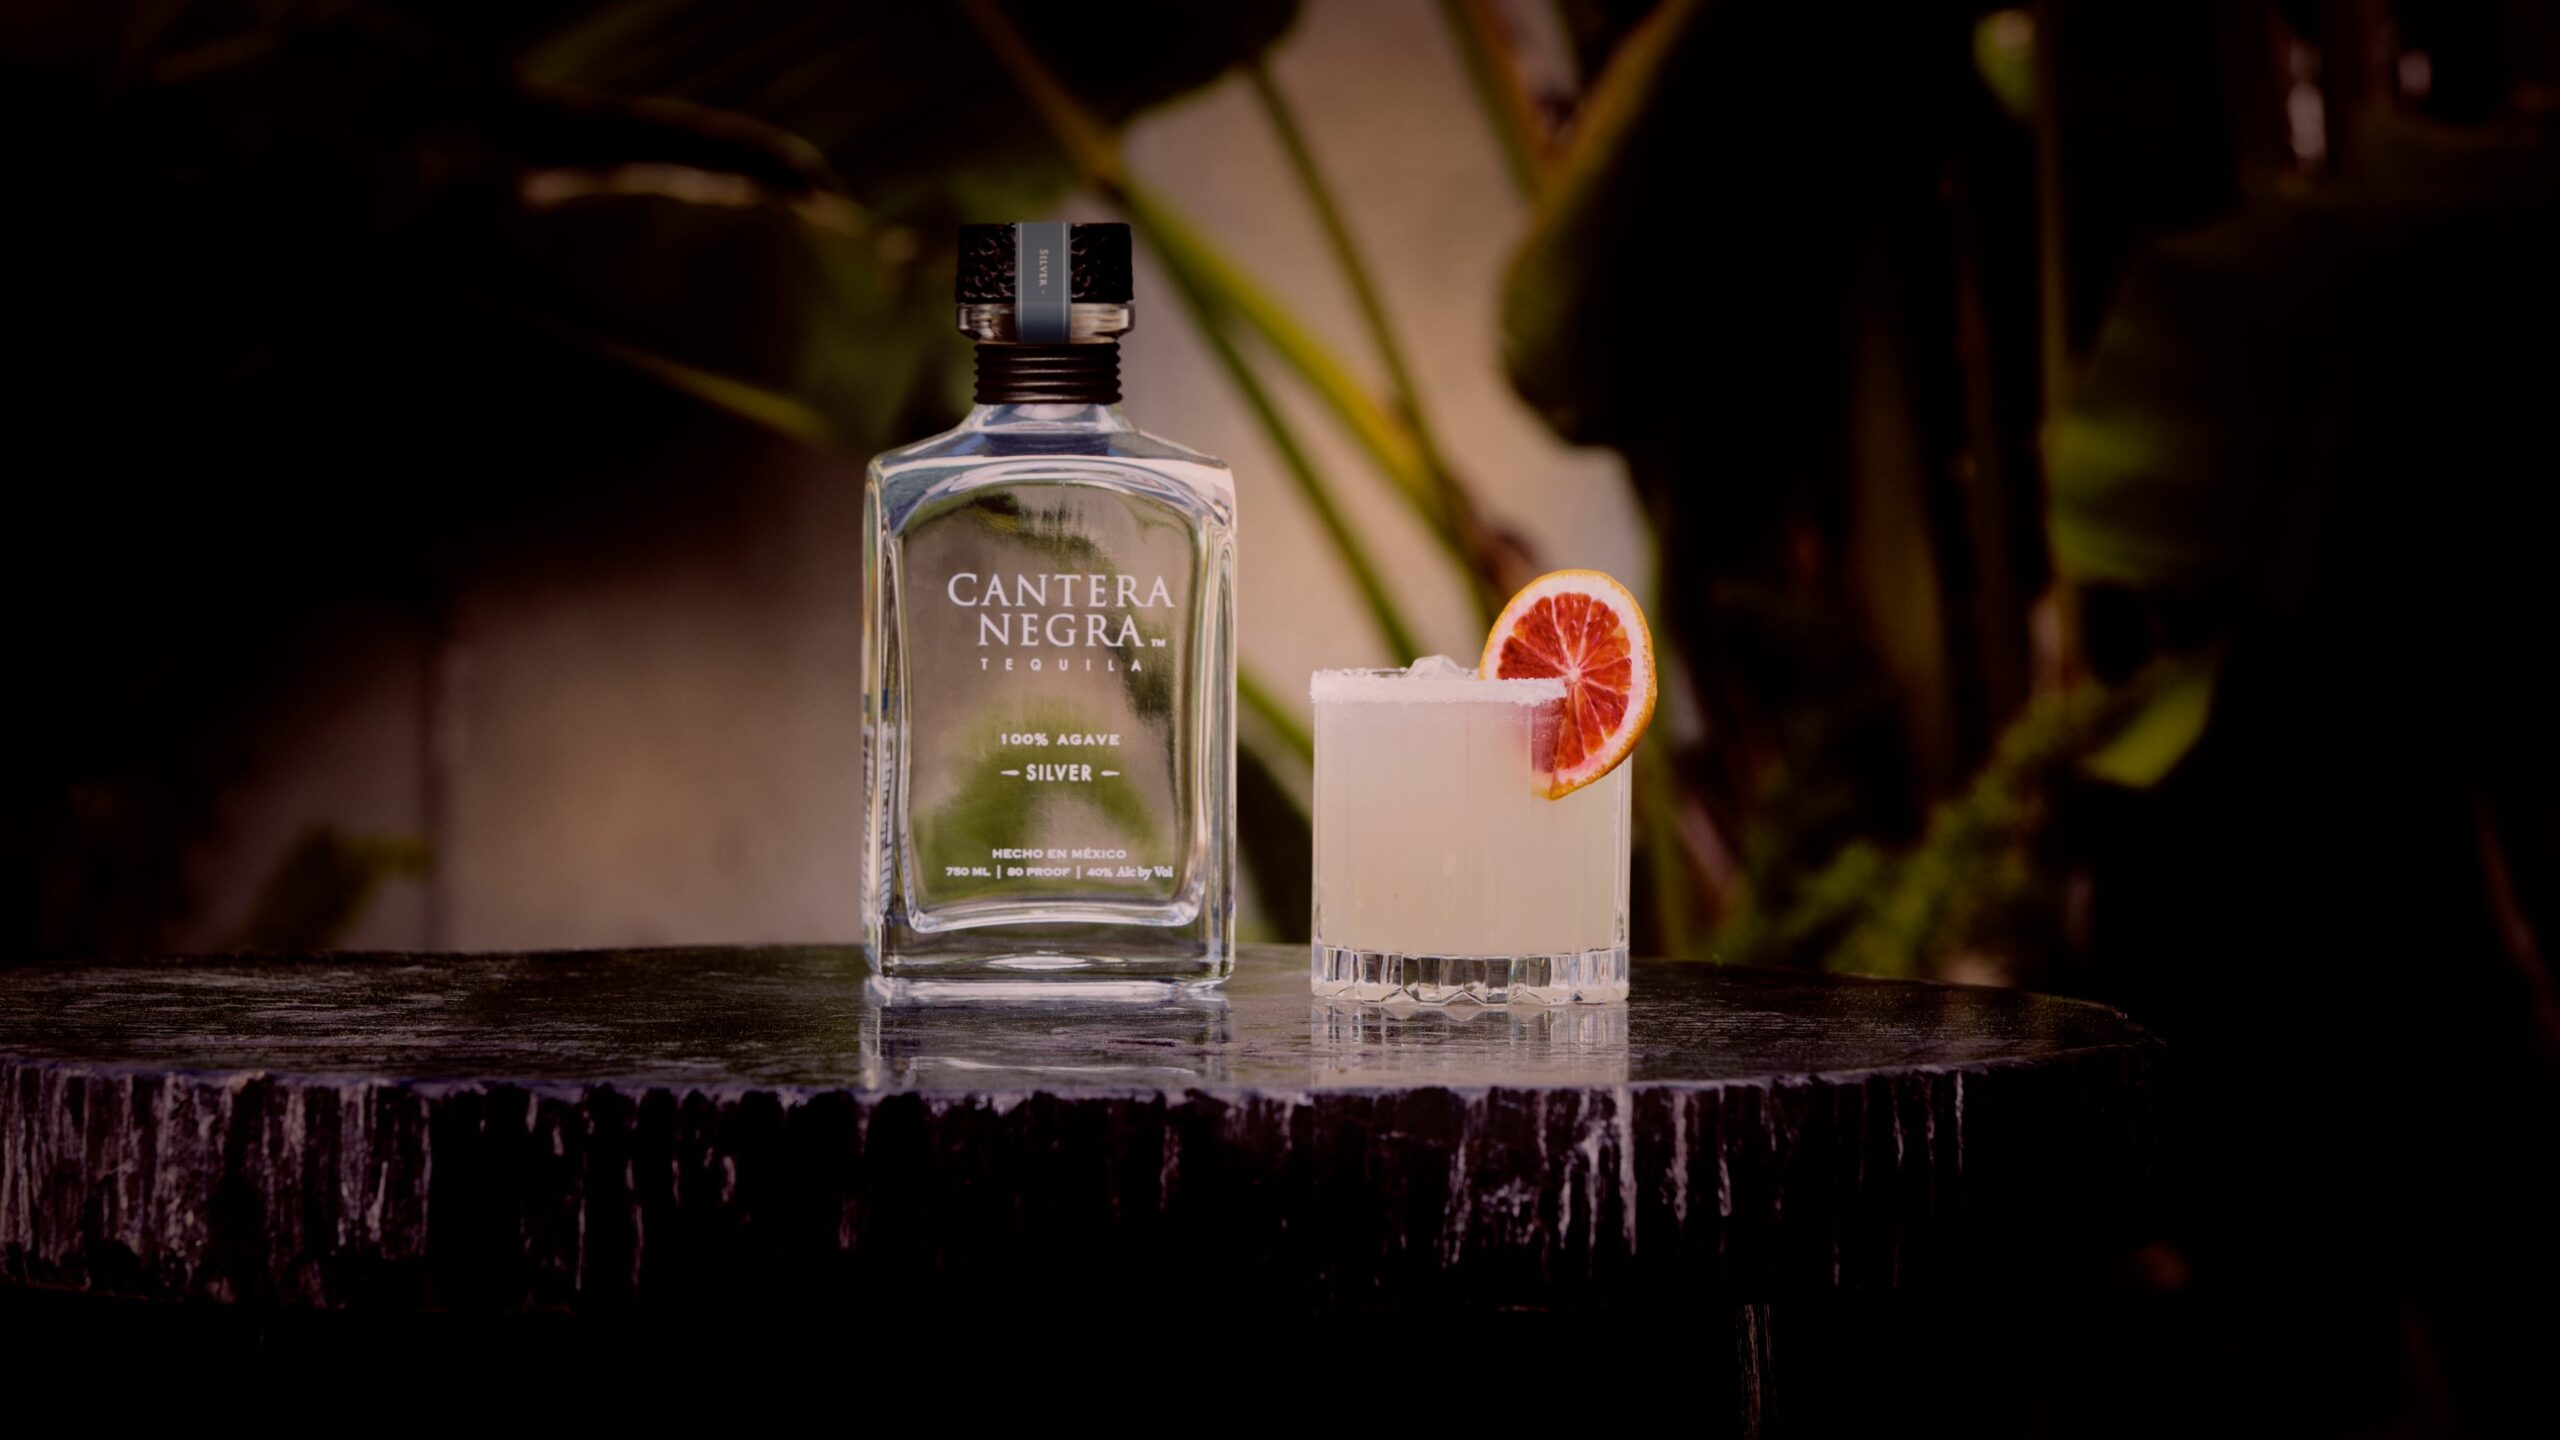 An image of Tommy's Margarita from Cantera Negra Tequila